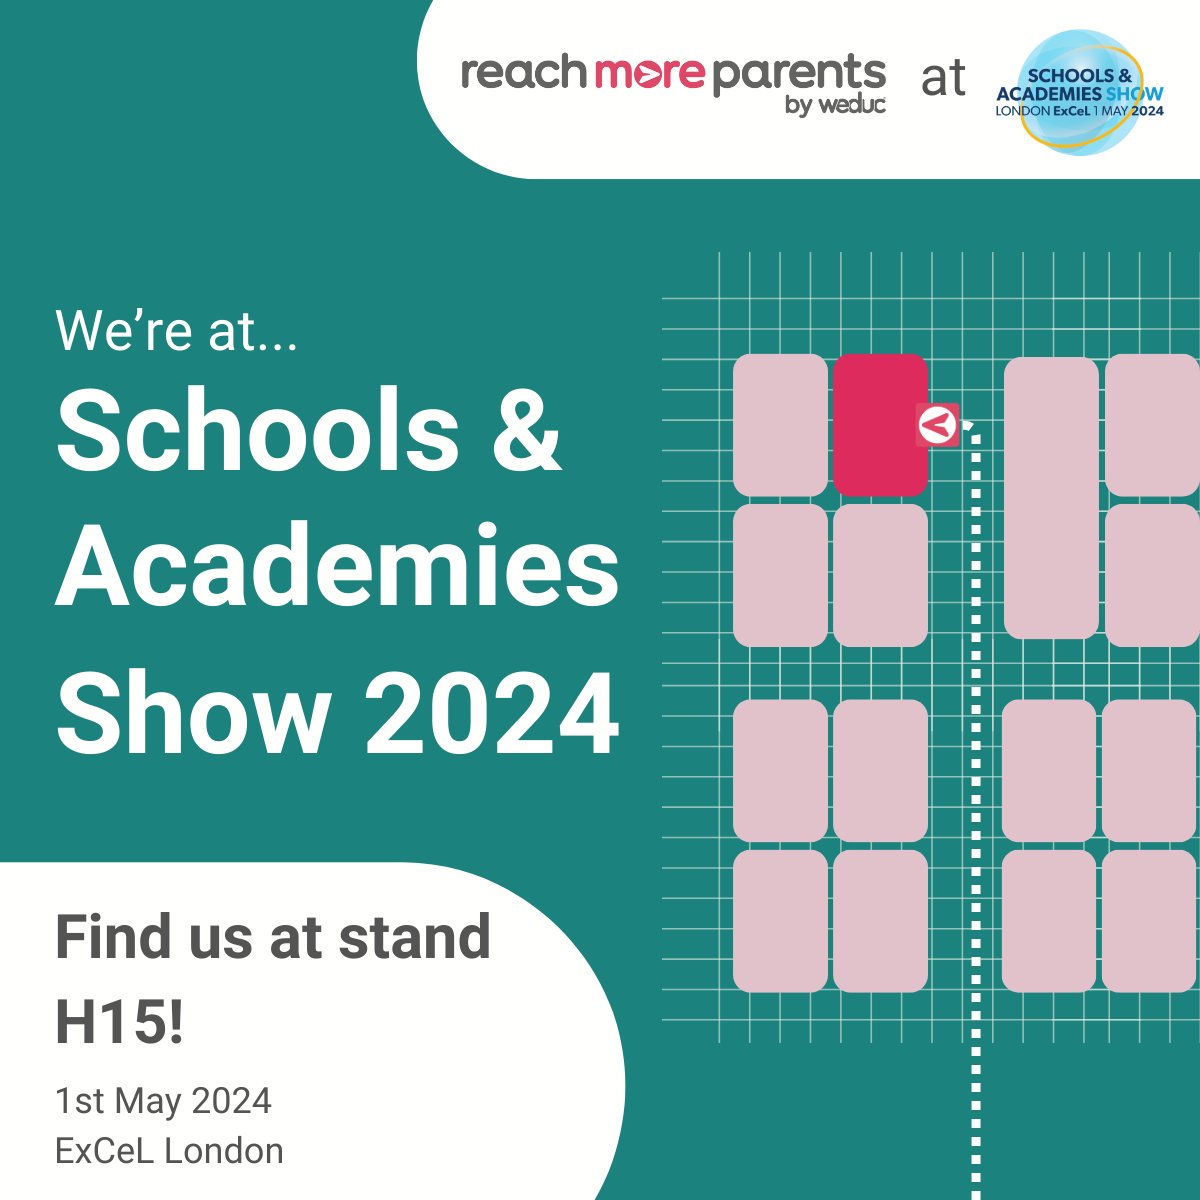 Exciting news! We will be showcasing our parental engagement platform at the Schools & Academies Show next week! Don't miss out on this opportunity to meet us and learn how our system reaches more parents than any other! eu1.hubs.ly/H08P20P0 #SAAShow #FanSAAStic @SAA_Show 📚🍎